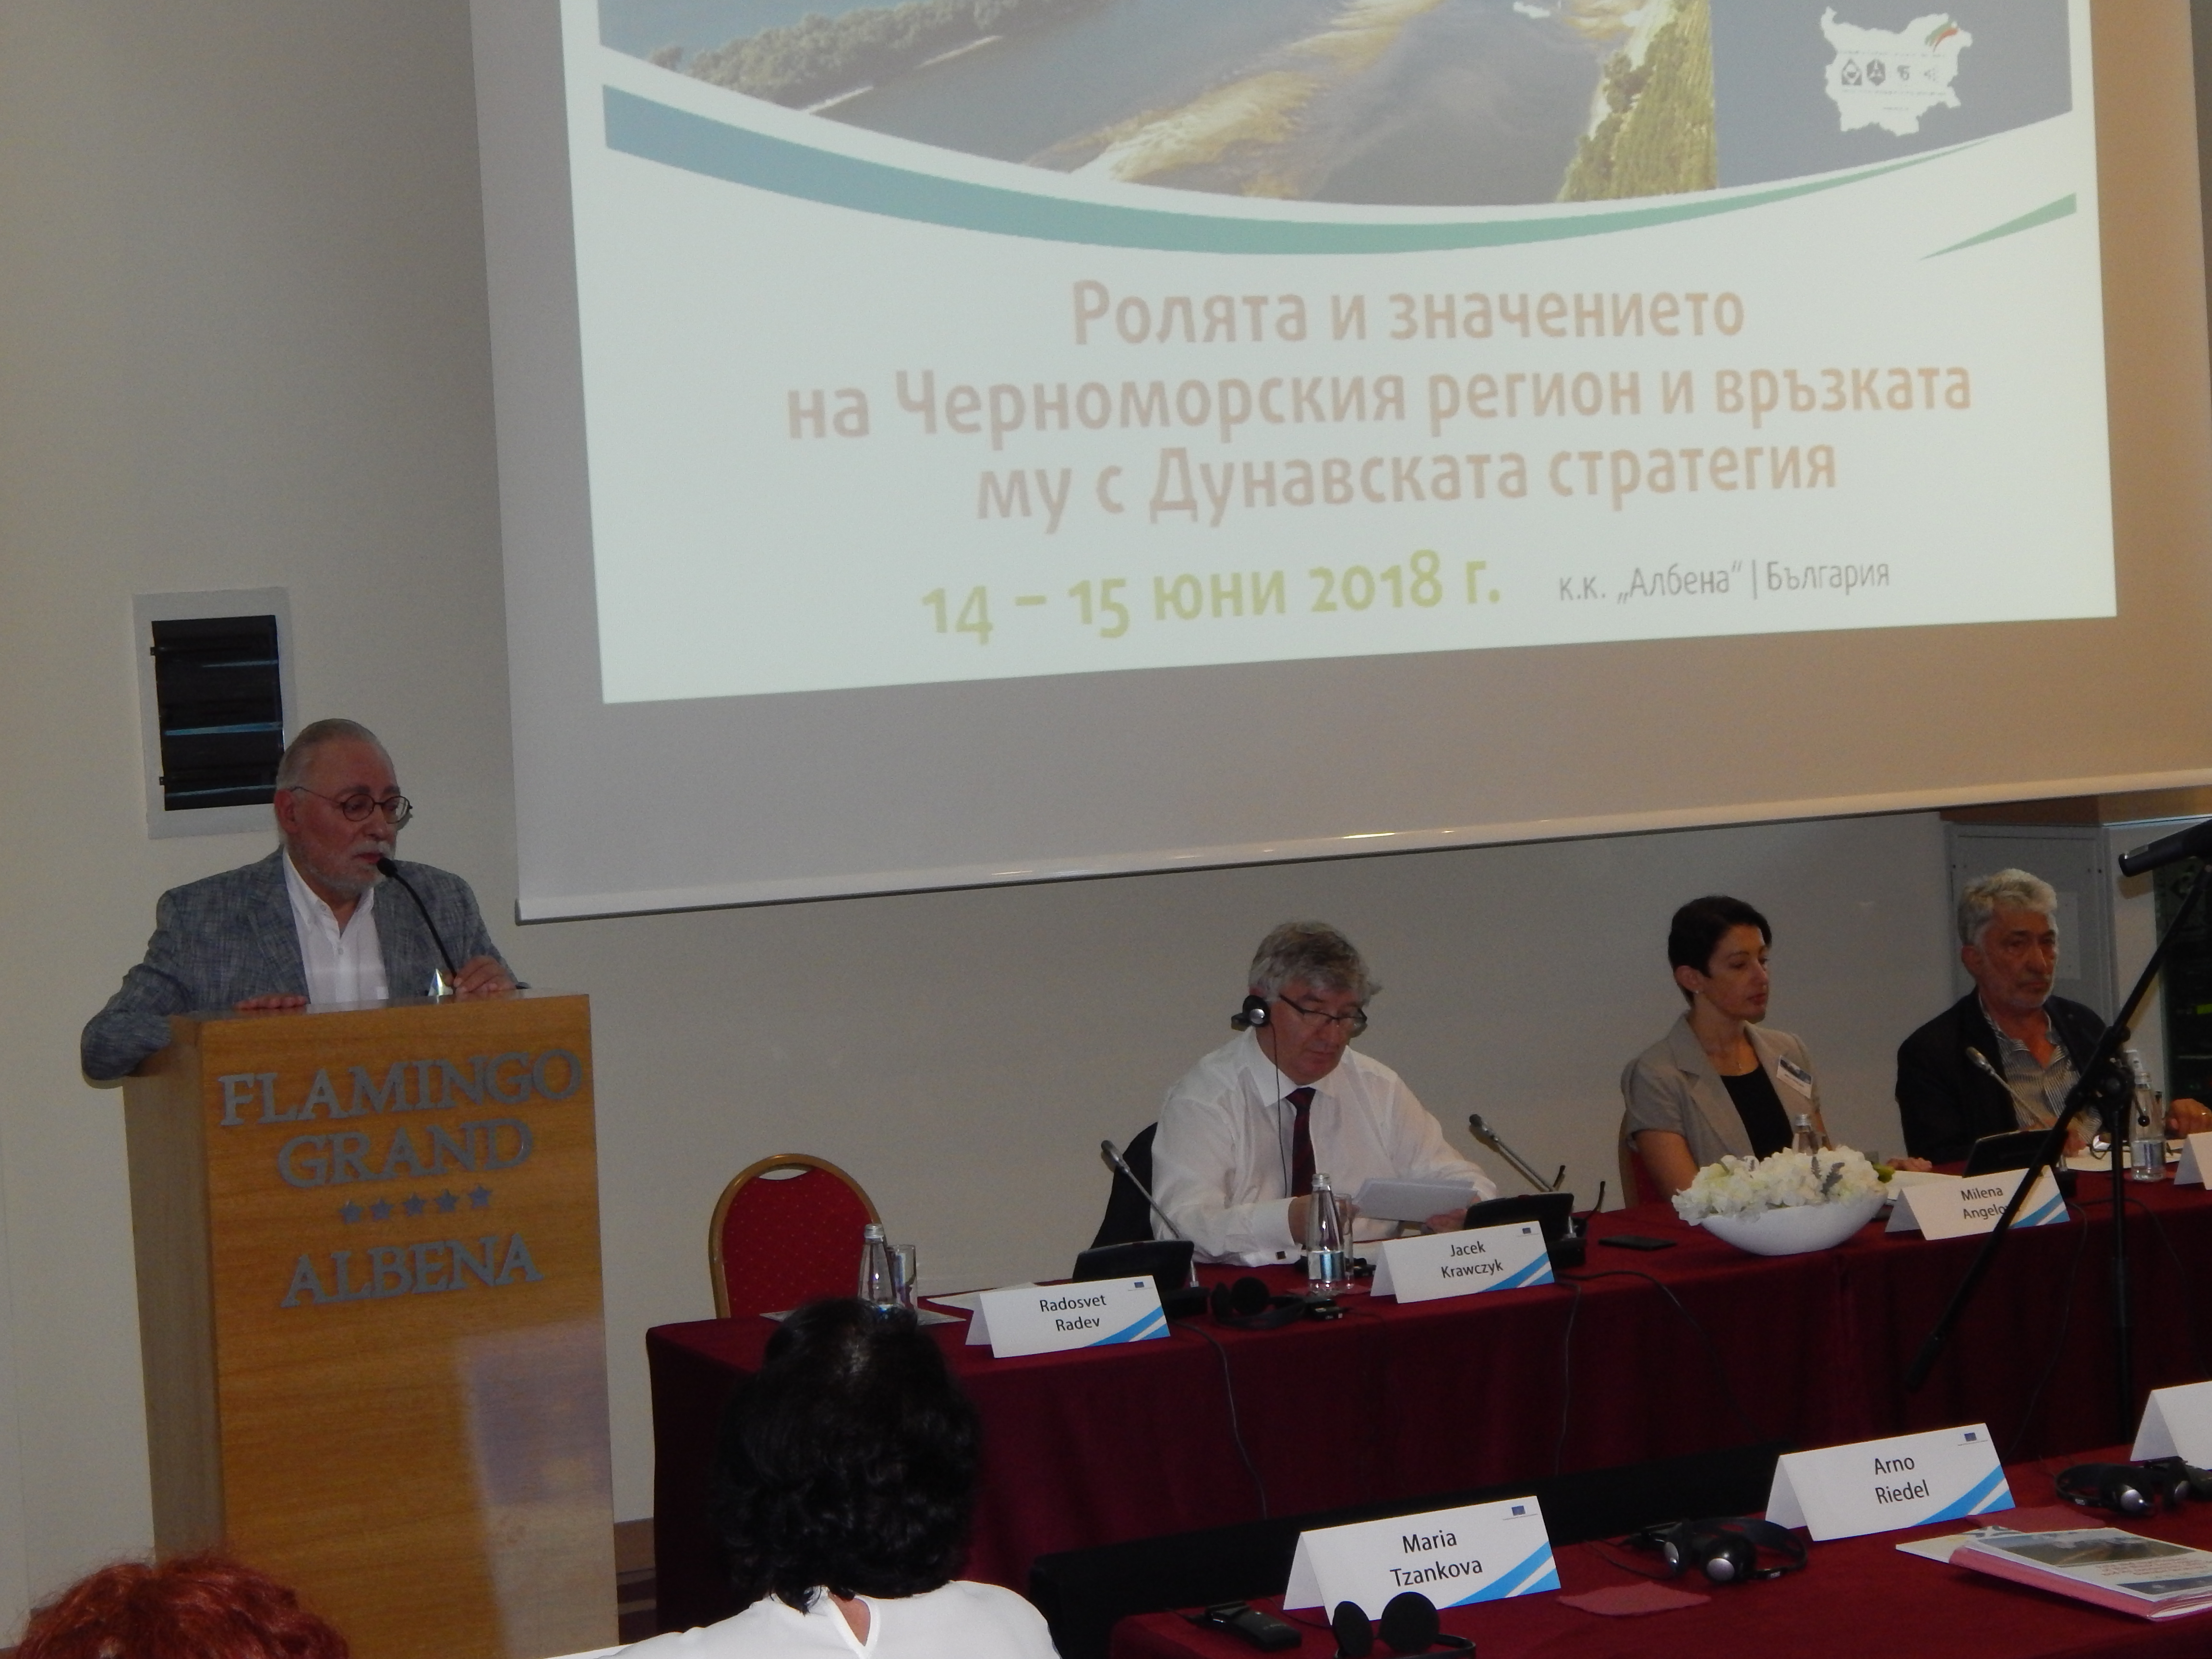 With a minute’s silence in memory of Bojidar Danev started a two-day international conference for the Black Sea region and its connection with the Danube strategy